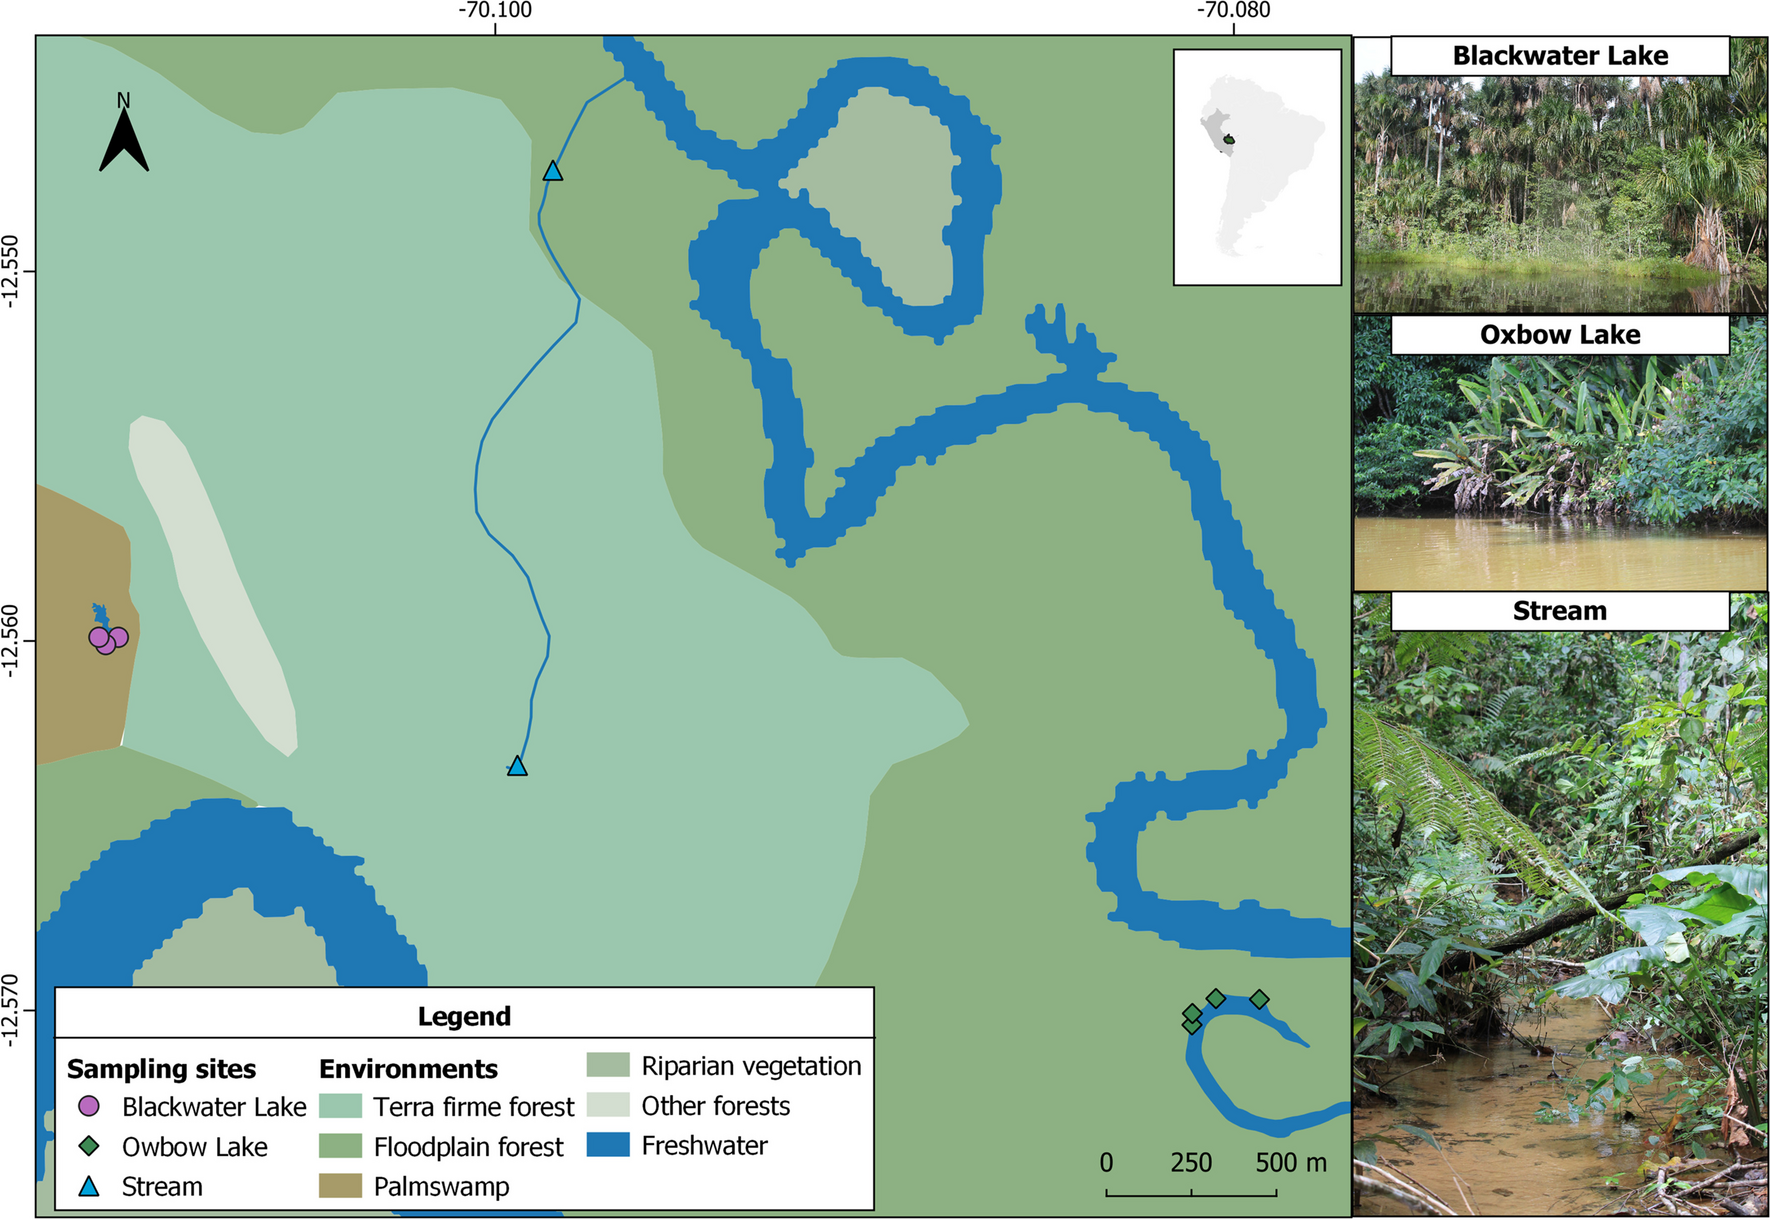 Variations in the Odonata Assemblages: How Do the Dry Season and Water Bodies Influence Them?